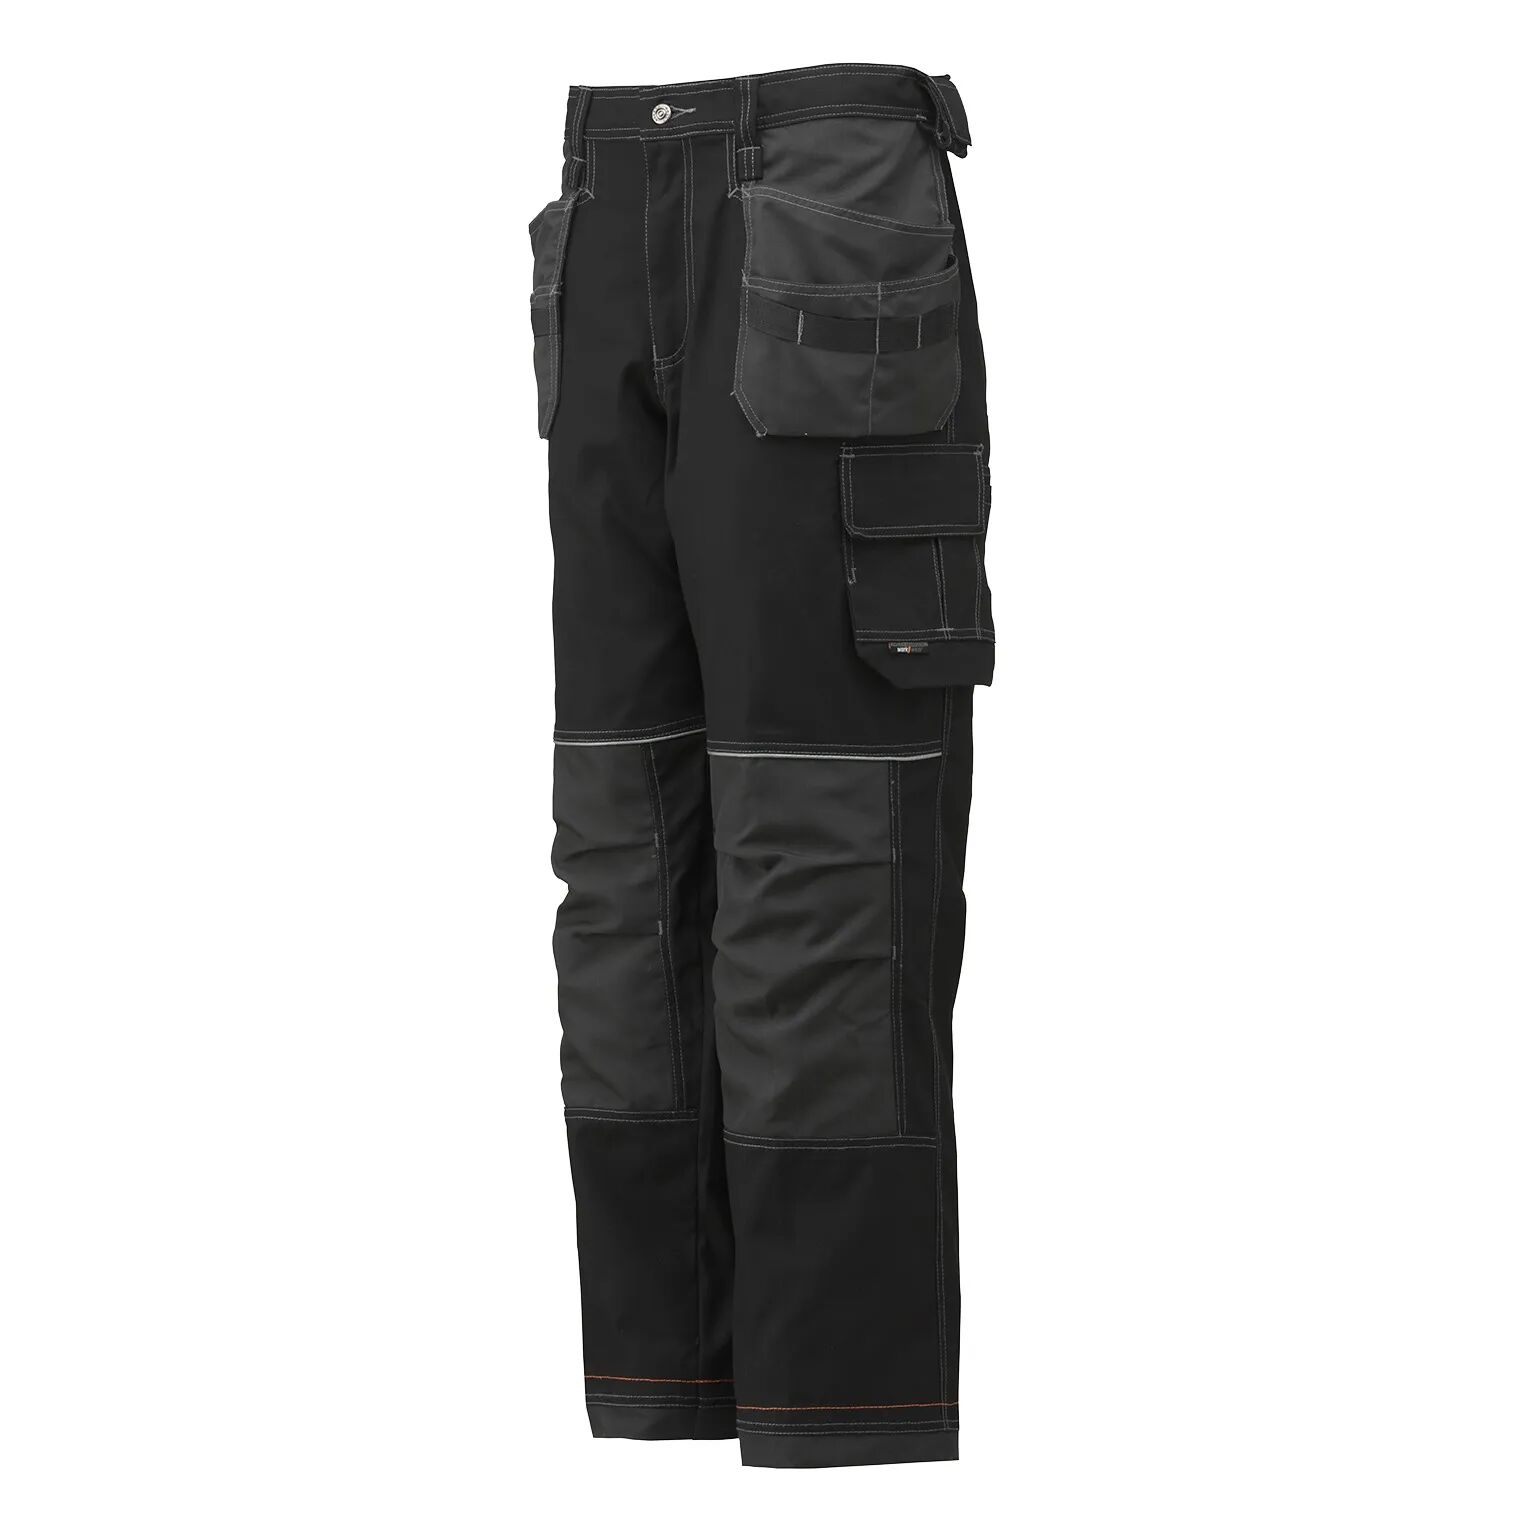 HH Workwear Helly Hansen WorkwearChelsea Lined Cons. Pant Black 36/30